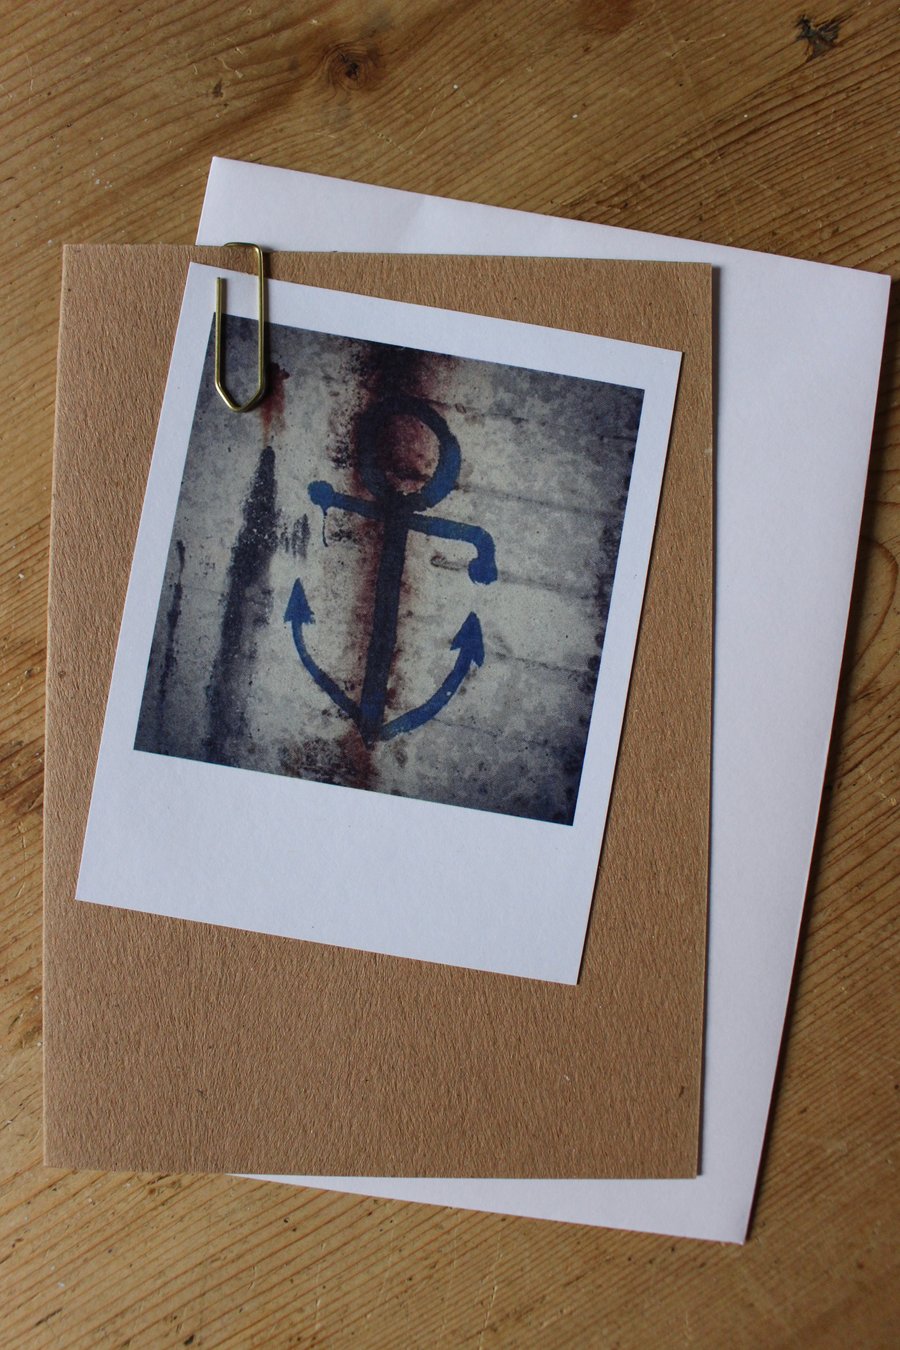 “Polaroid” style photo card: Letters and Numbers